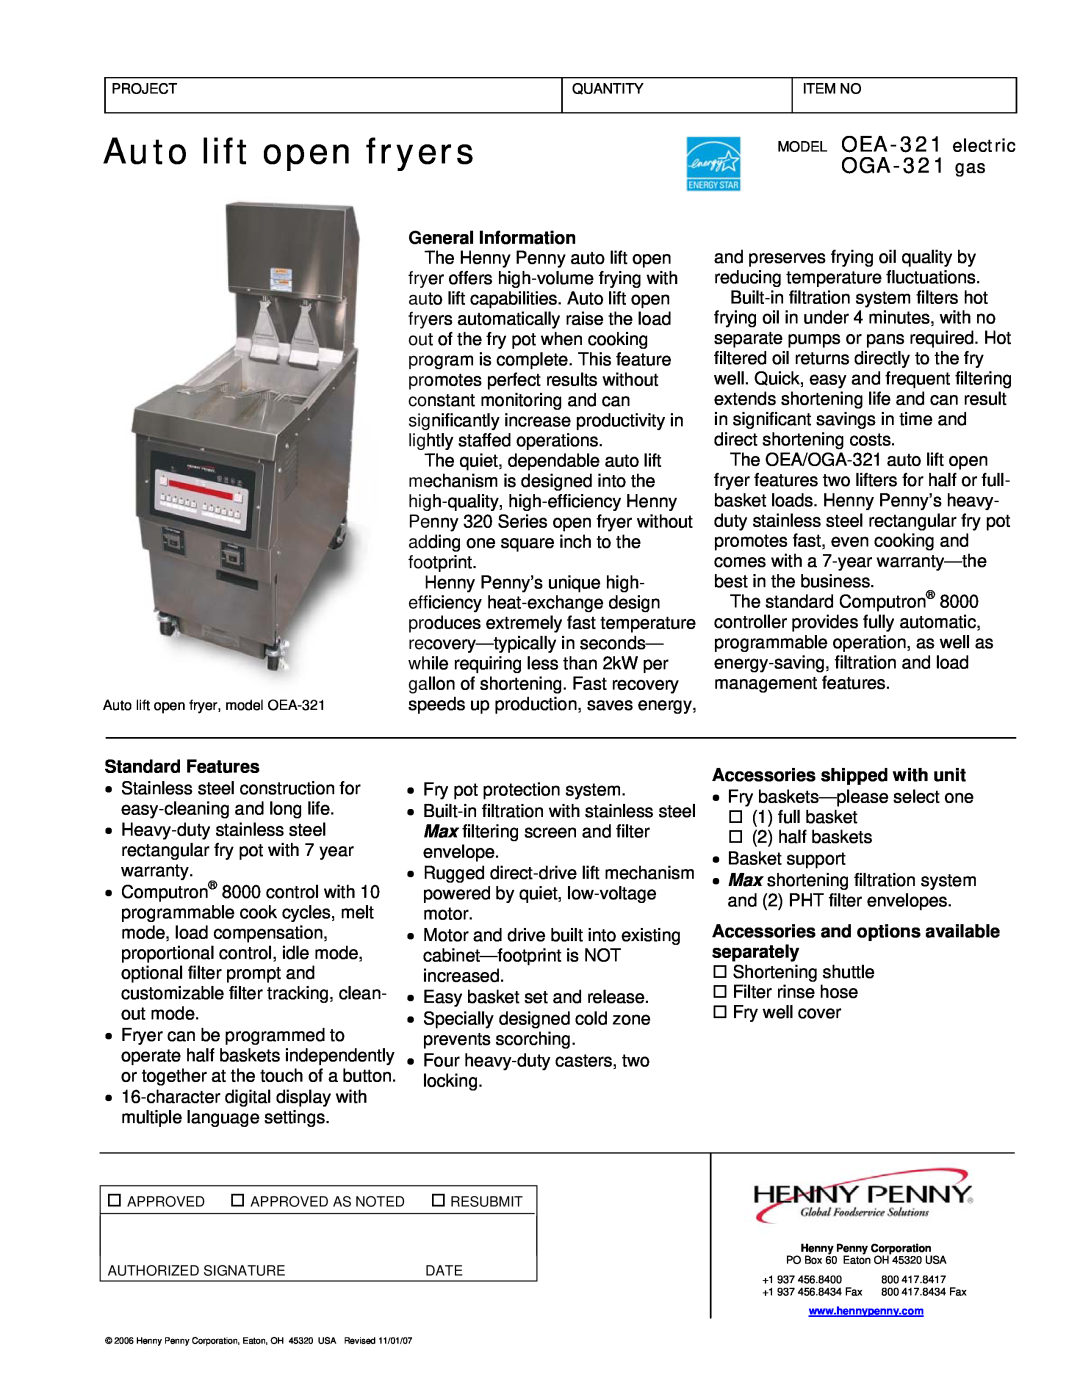 Henny Penny OEA-321 warranty Auto lift open fryers, General Information, Standard Features, Accessories shipped with unit 